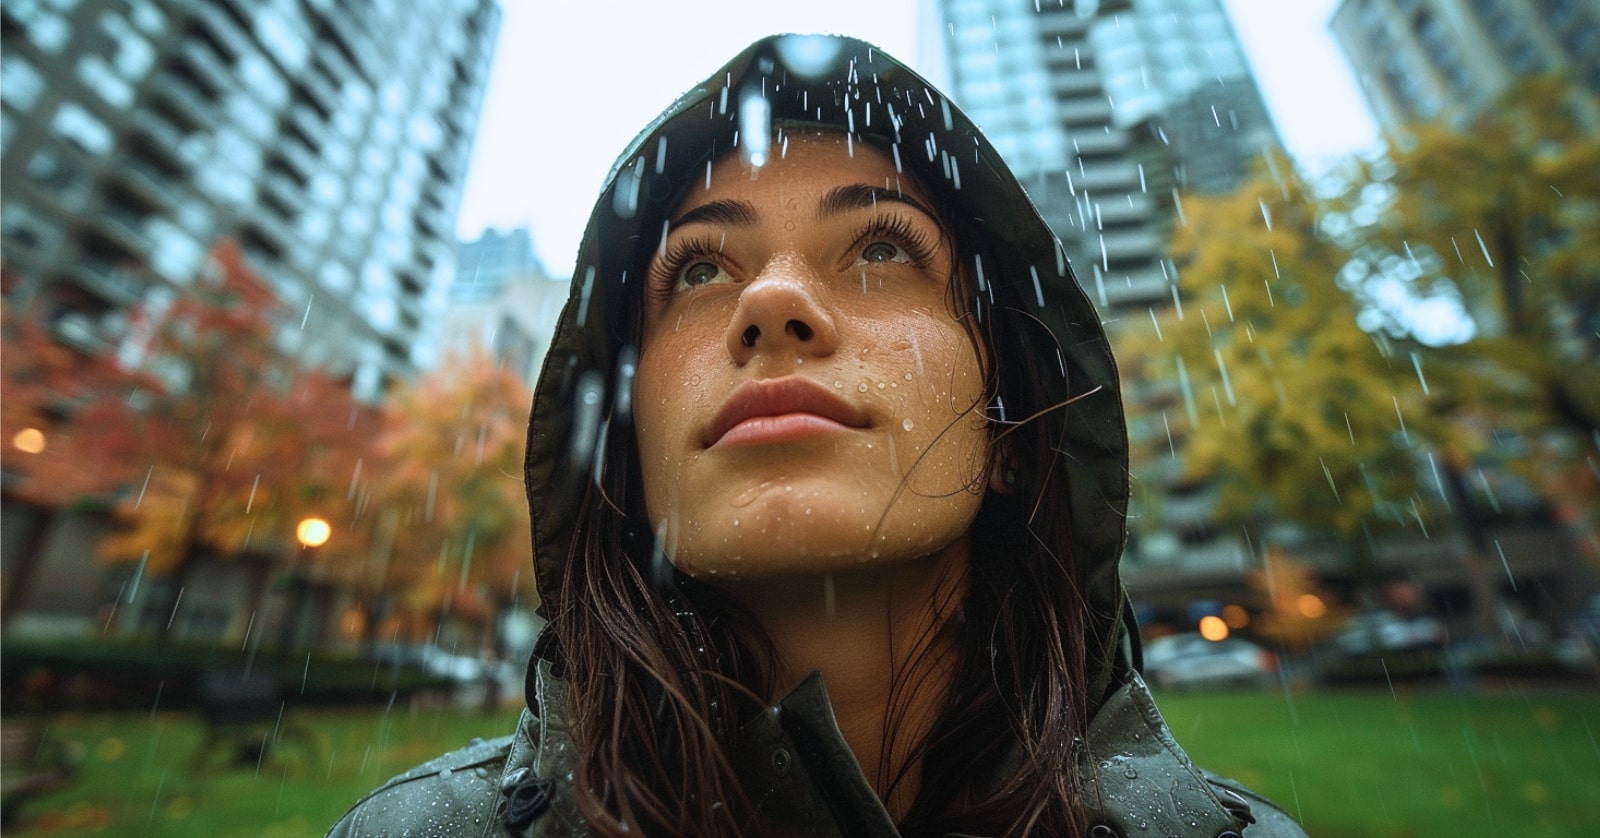 closeup portrait of a woman in the rain. Her hood is up but she is looking slightly up so there are raindrops on her face. The raindrops are also visible as they fall. She stands in an urban park.